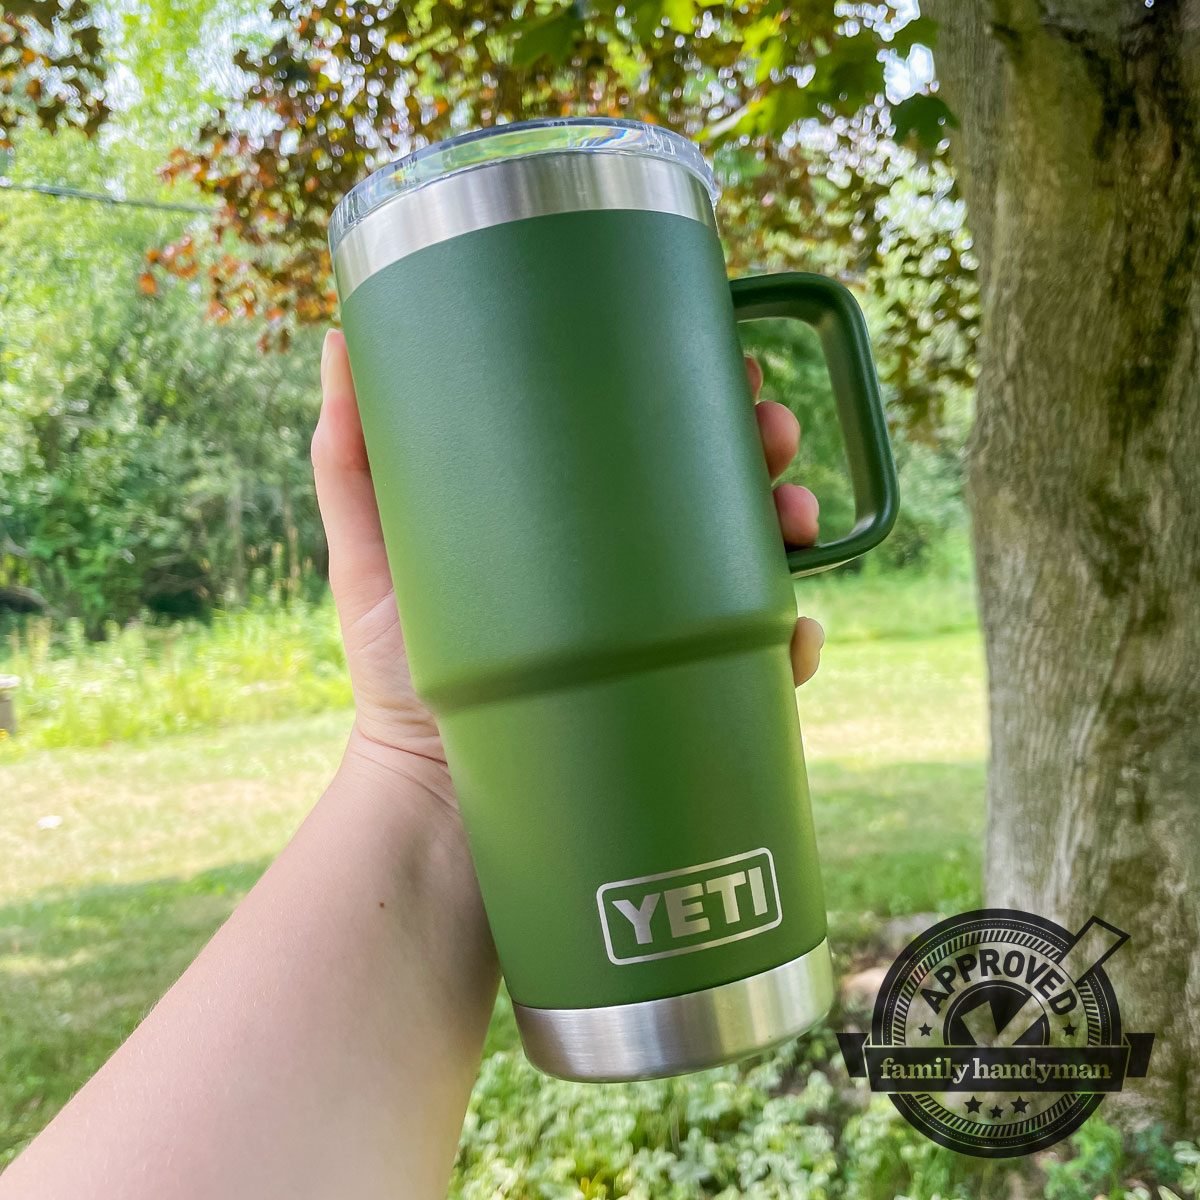 https://www.familyhandyman.com/wp-content/uploads/2023/08/FHM-The-9-Best-Yeti-Products-Our-Editors-Tested-and-Loved-Yeti-Rambler-30-Ounce-Travel-Mug-Mary-Henn-Family-Handyman-YETI-Rambler-30-Oz-Travel-Mug_KSedit.jpg